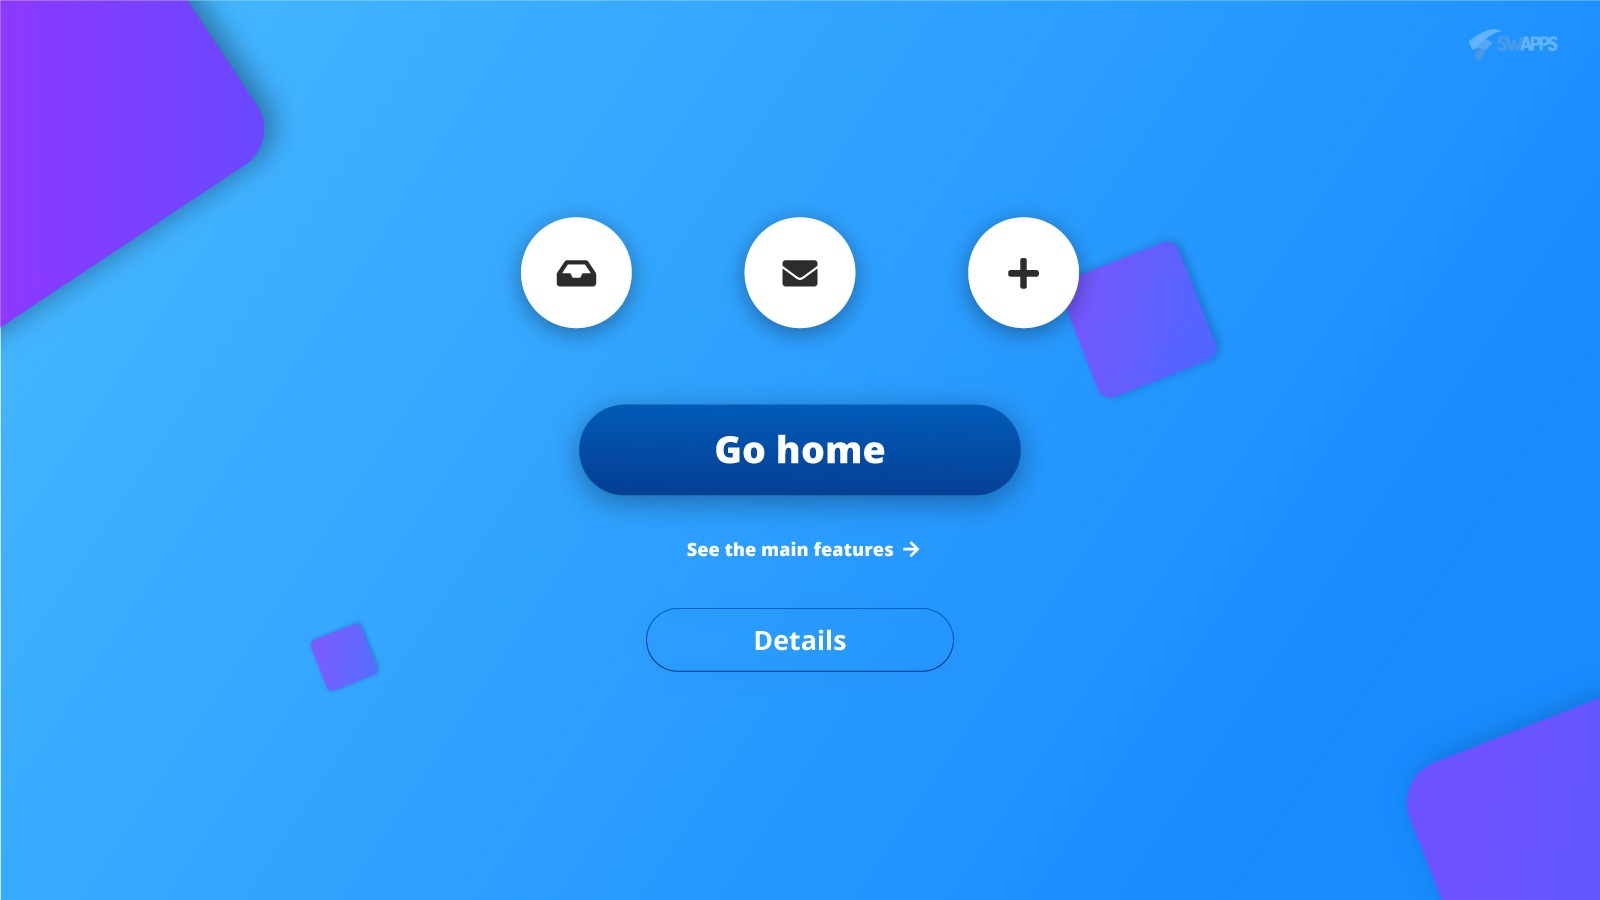 home buttons for websites